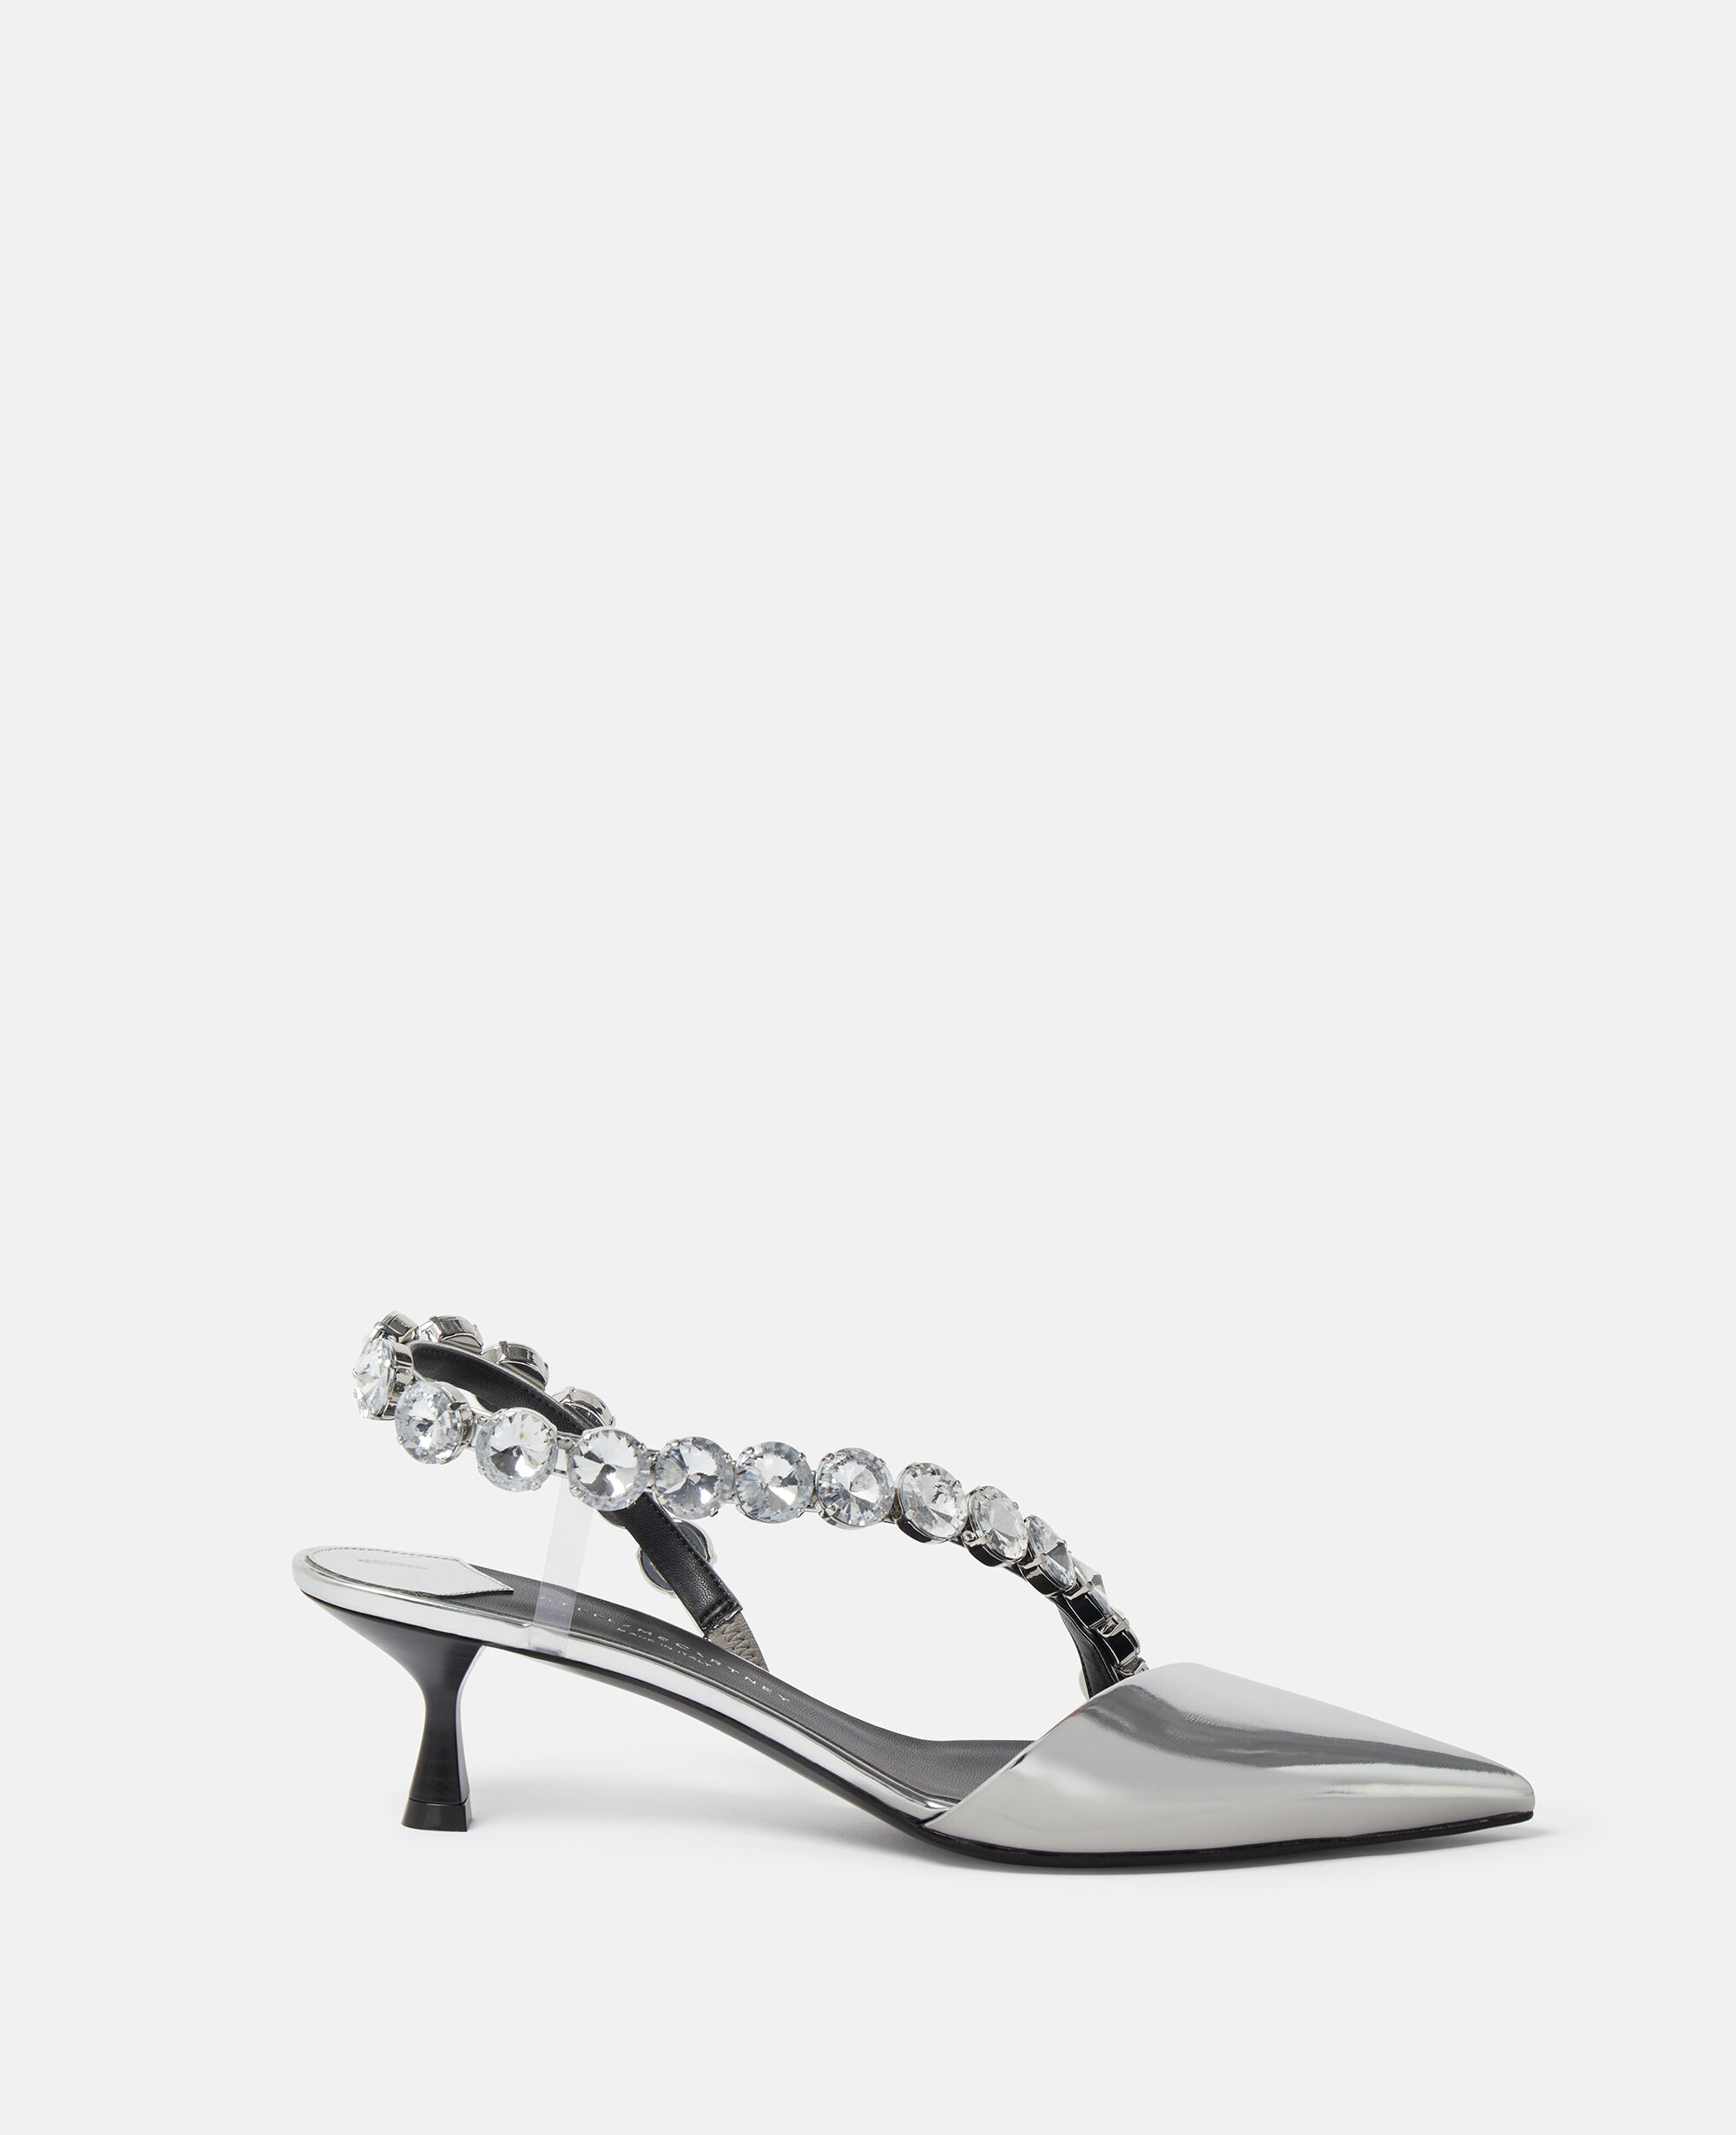 Lib Pointed Toe 4 inches Stiletto Heels Sequins Classic Pumps - Silver in  Sexy Heels & Platforms - $89.67